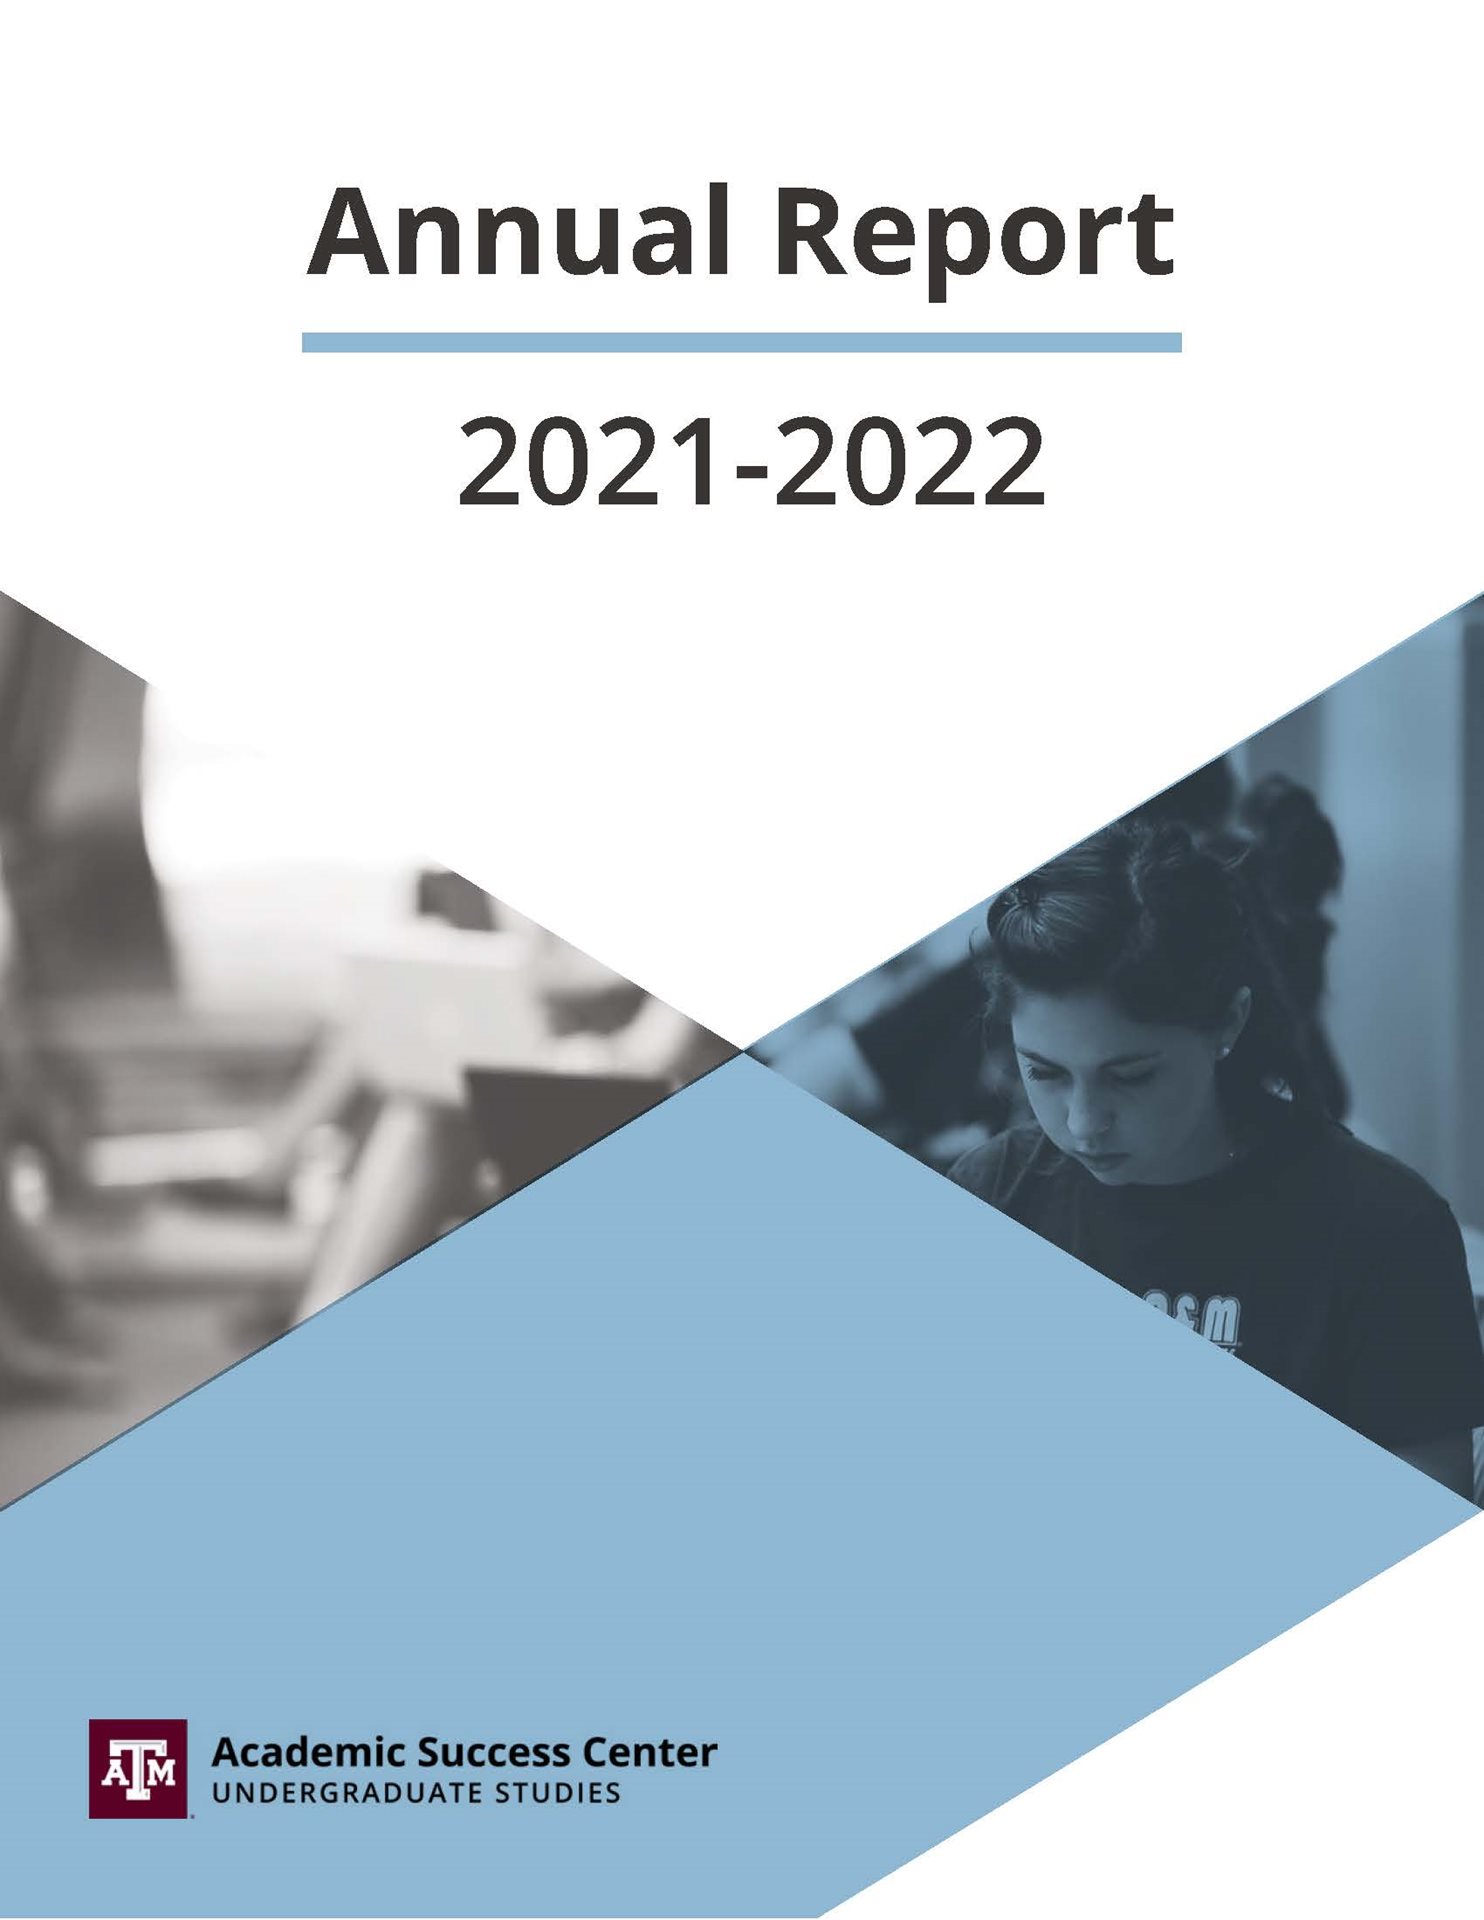 ASC Annual Report Cover 2021-2022